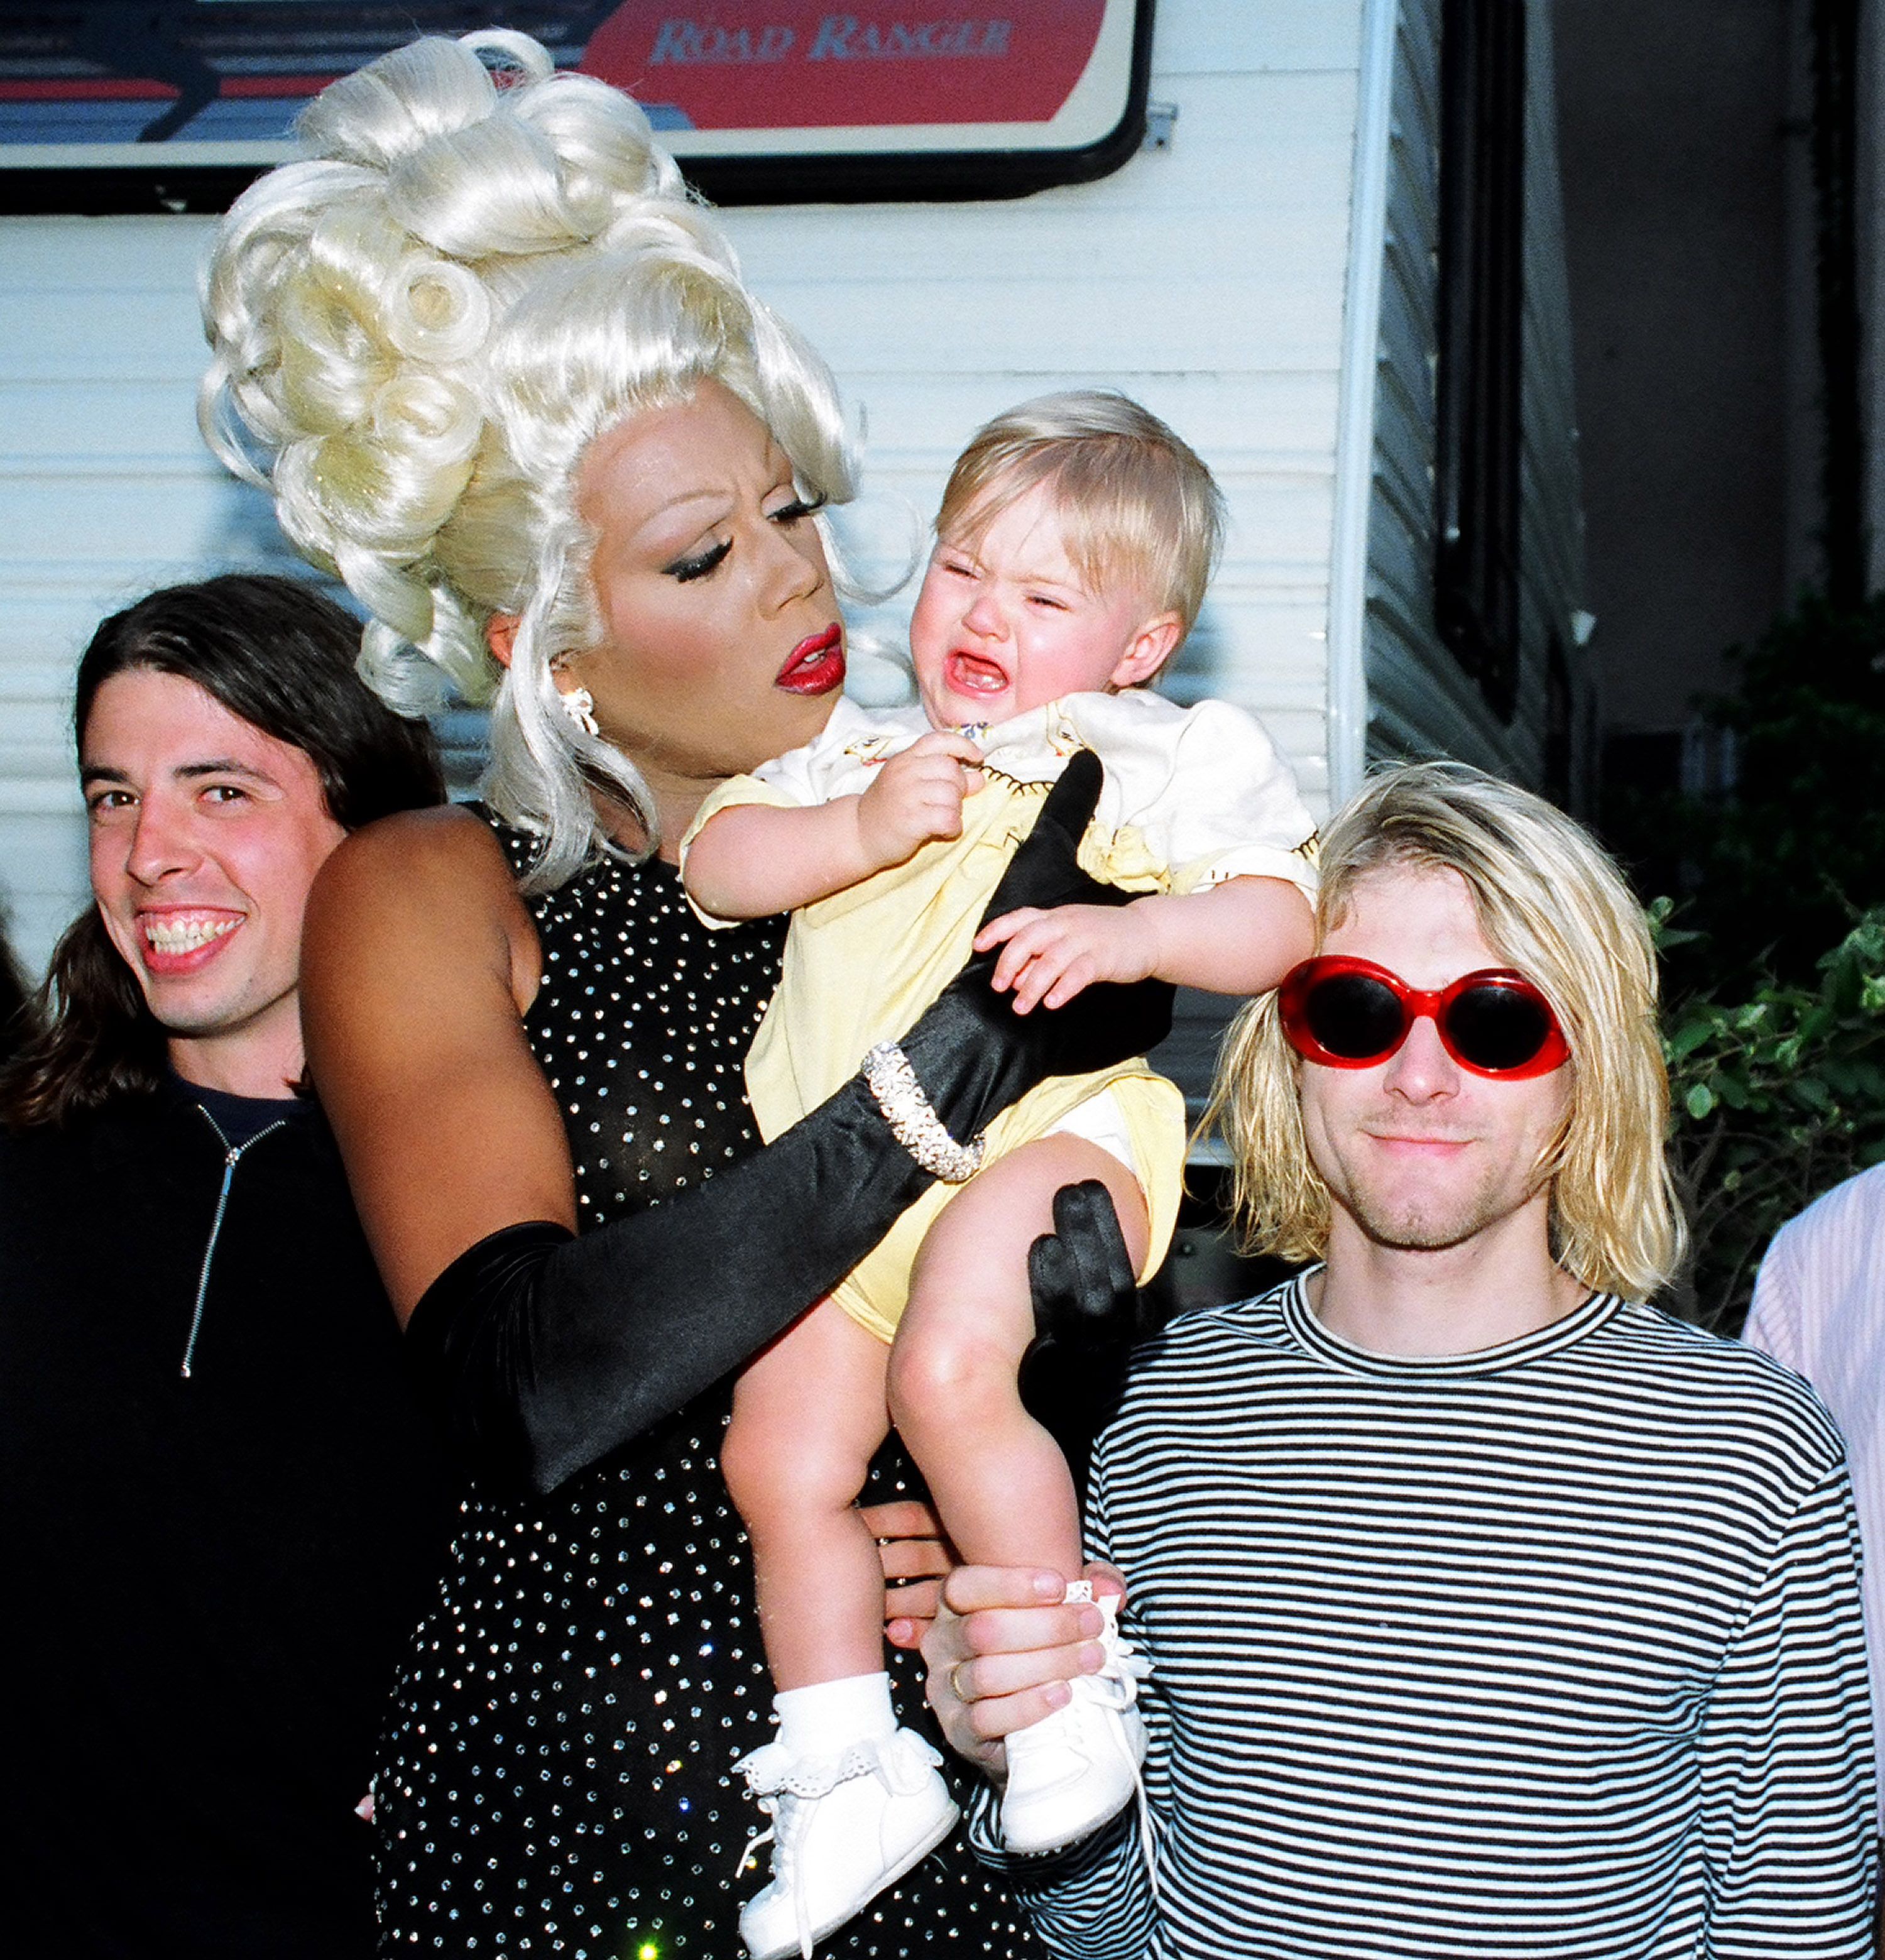 Kurt Cobain with RuPaul and Frances Bean Cobain at the 1993 MTV Video Music Awards | Source: Getty Images